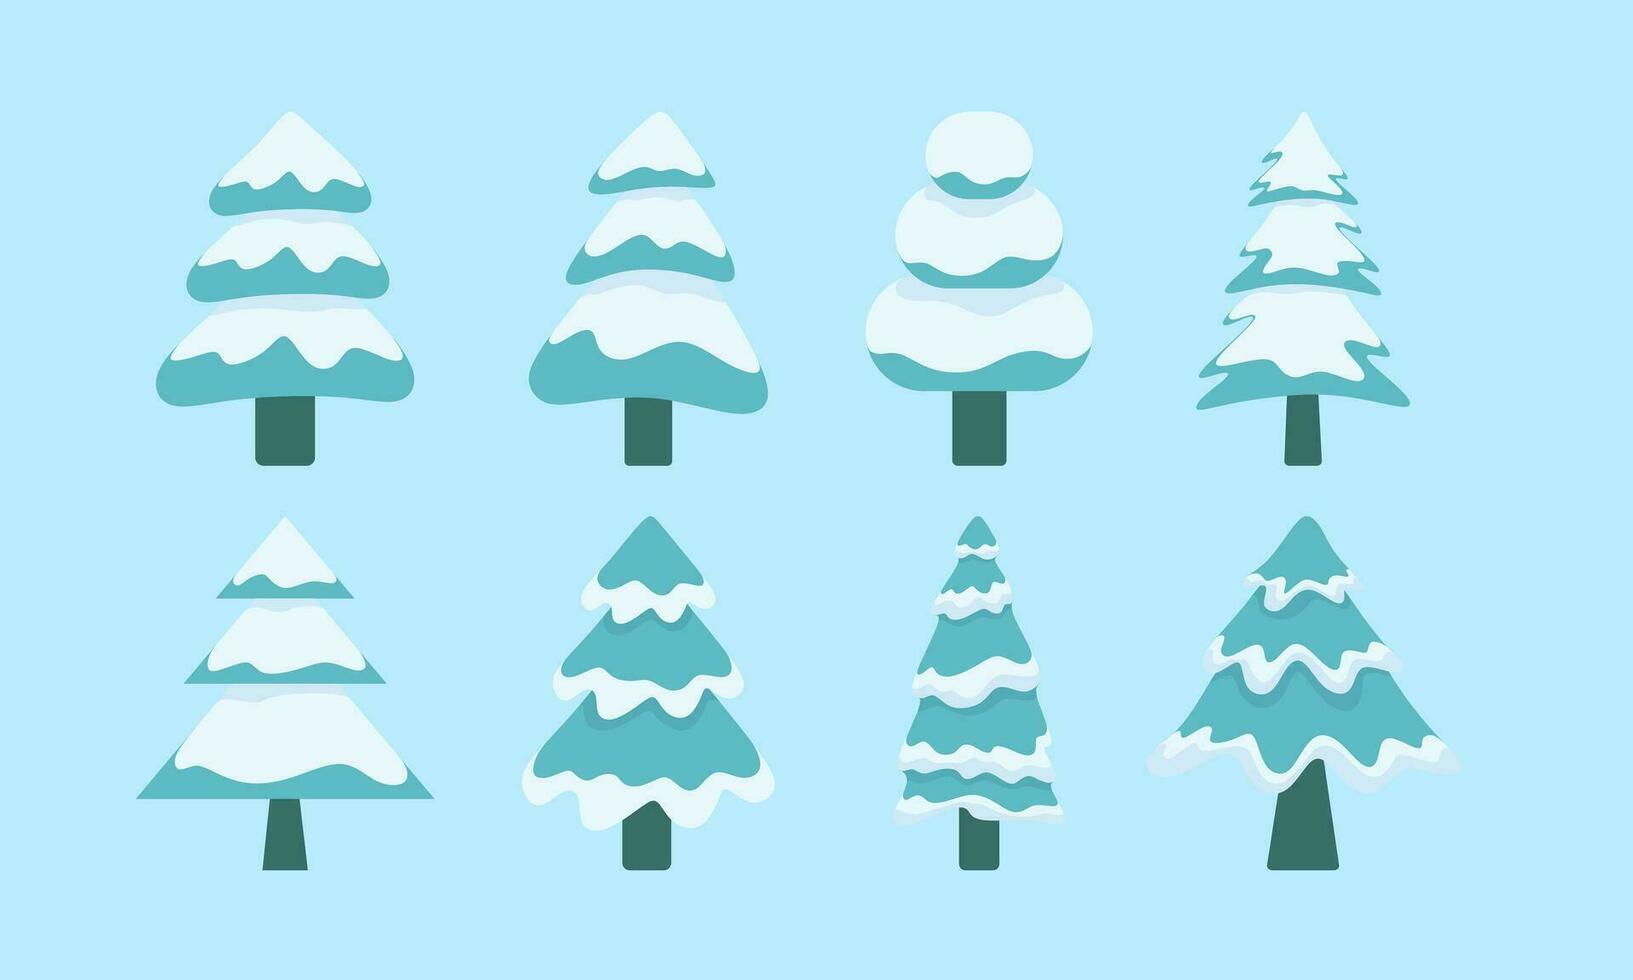 winter trees, vector isolated illustration of trees, leaves, fir trees, shrubs, sun, snow and clouds, winter elements of nature to create a landscape